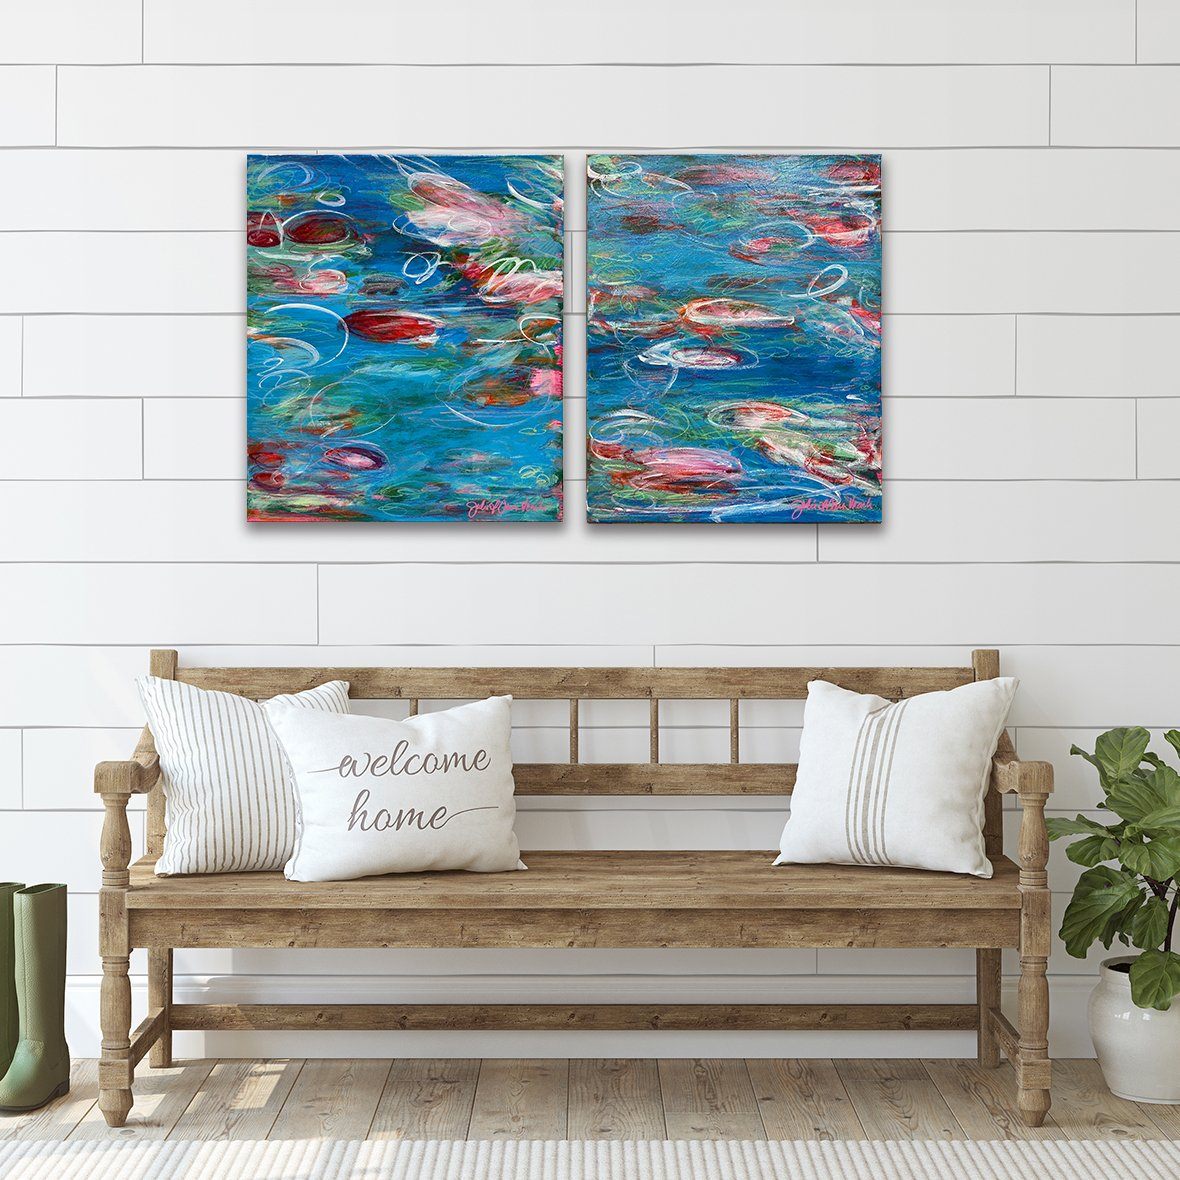 "Monet Monday" Dyptich Set 16x20" Originals on Canvas by artist Julie A. Davis Veach displayed together in a contemporary home